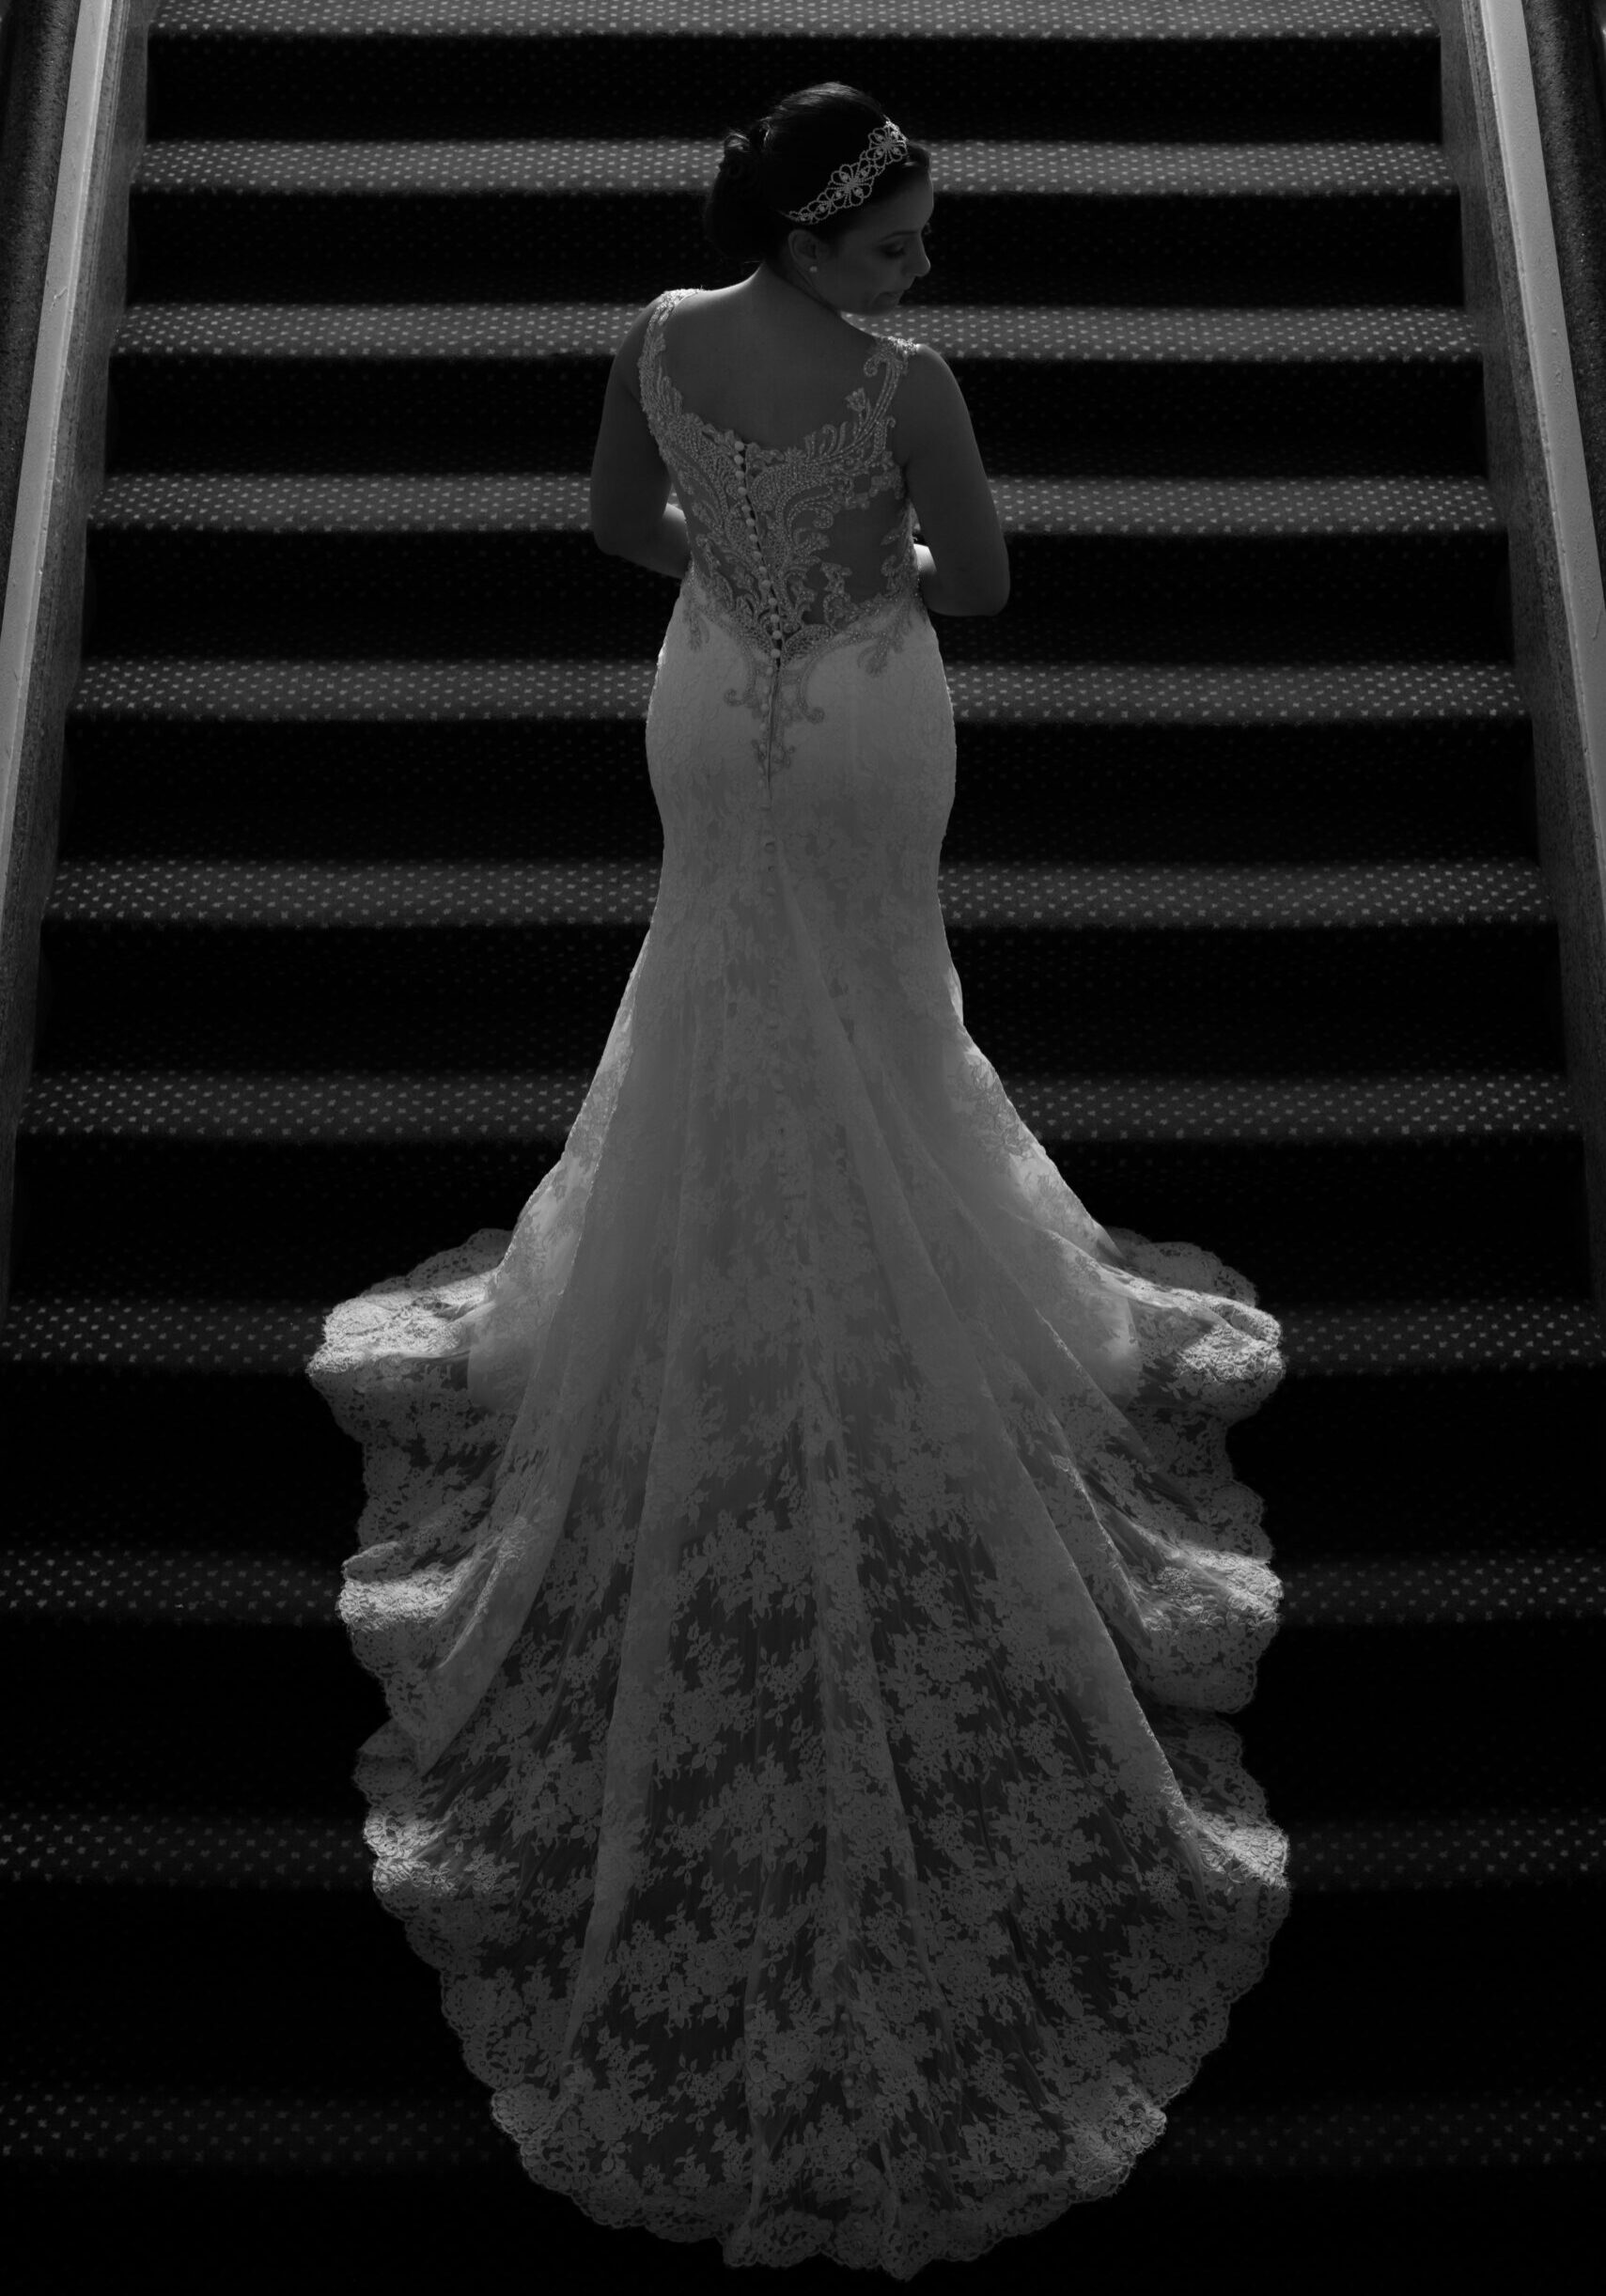 Bride in dramatic lighting on a stair at Antiguo Casino de Ponce